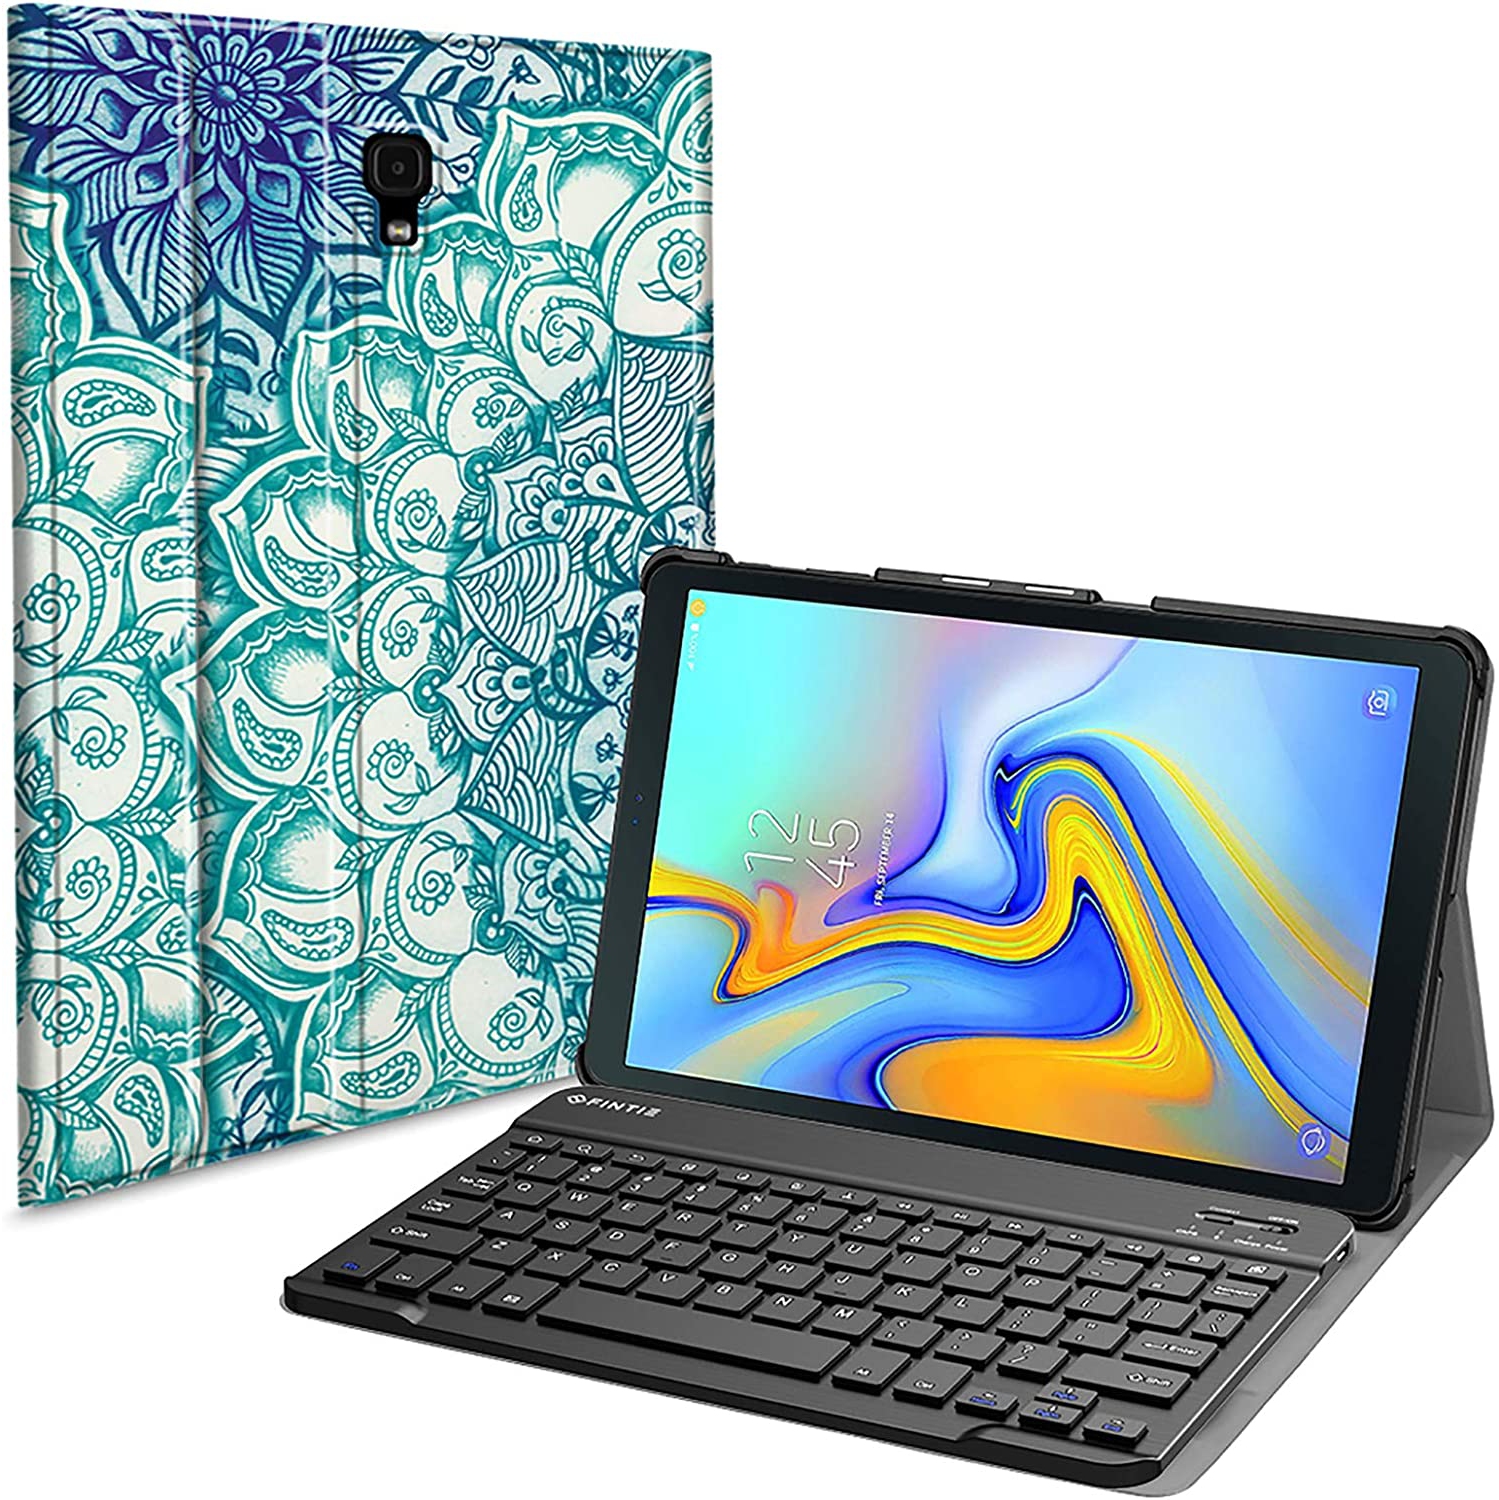 Keyboard Case for Samsung Galaxy Tab A 10.5 2018 Model SM-T590/T595/T597, Slim Shell Lightweight Stand Cover